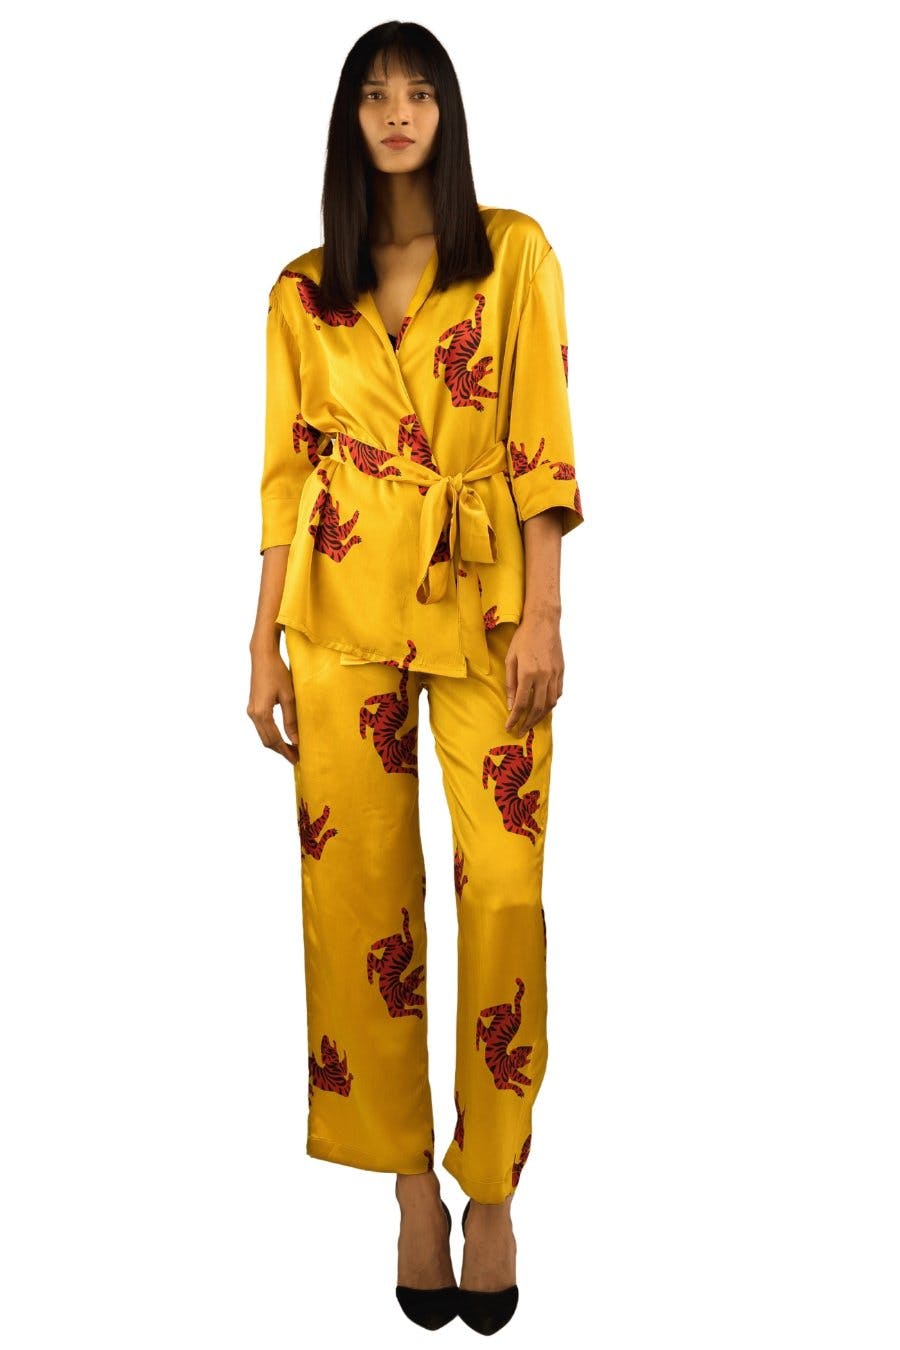 Be A Tigress Printed Co-ord PJ Set, a product by Sleeplove